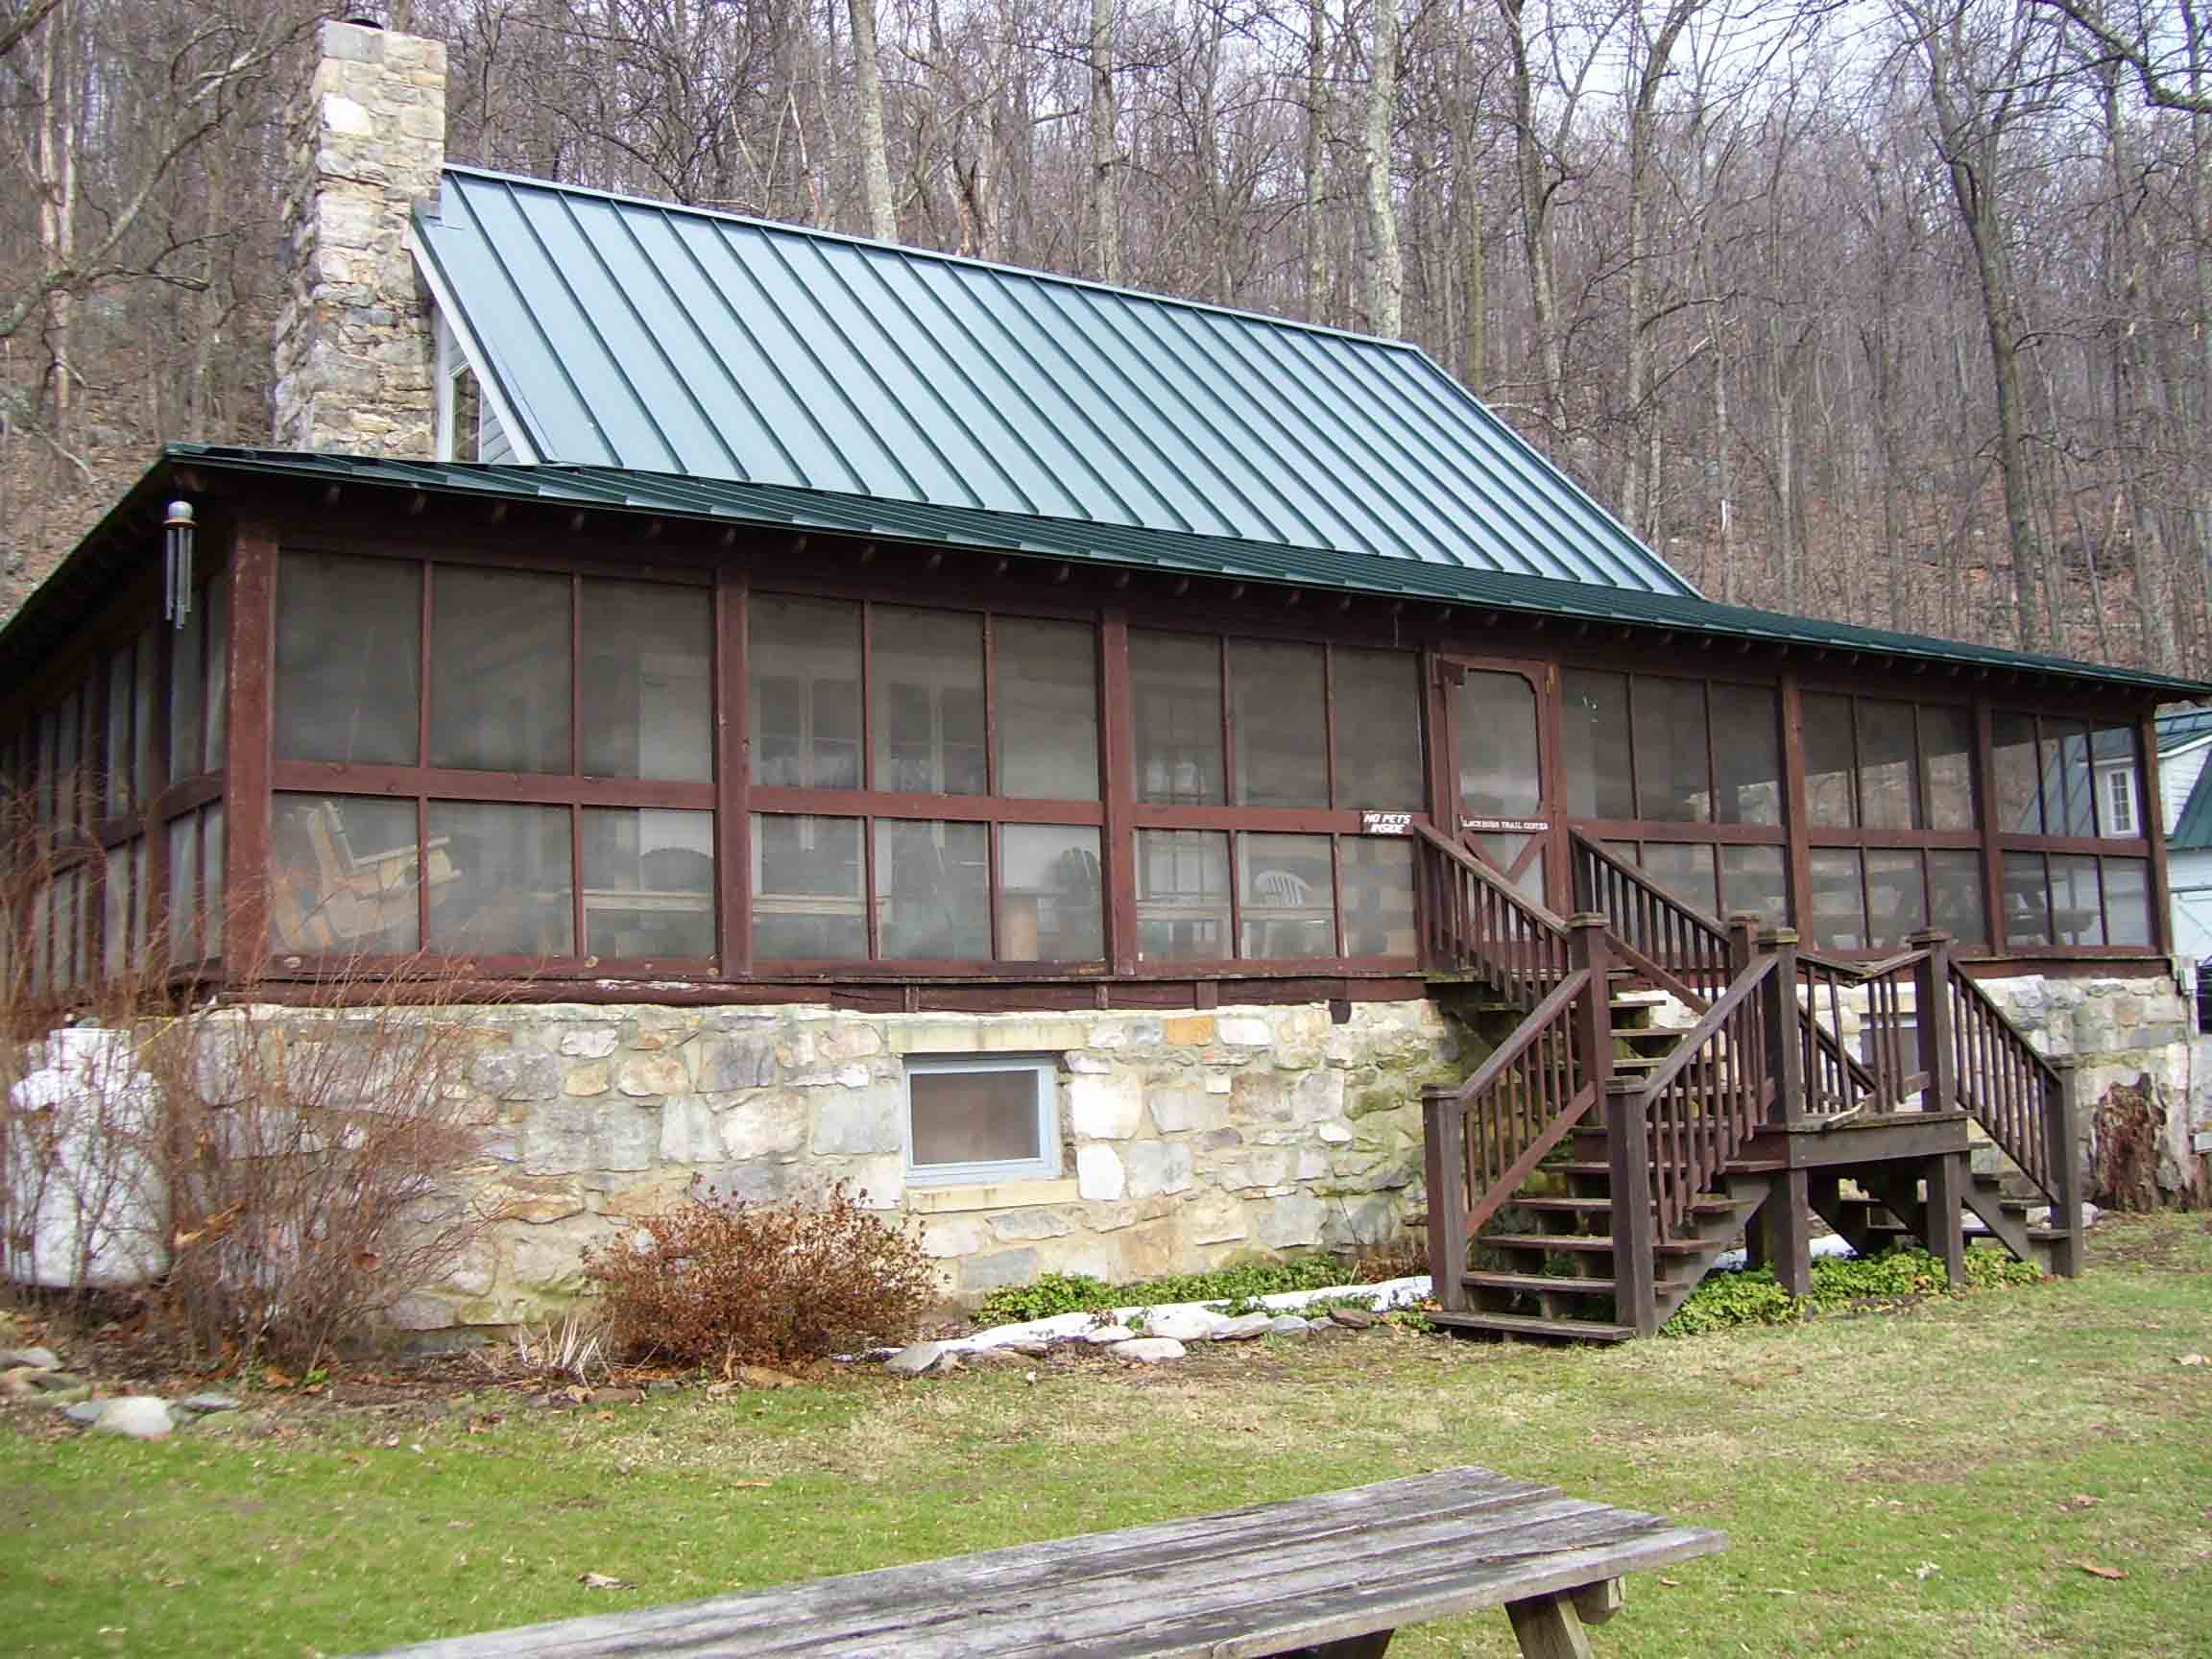 Main building at Blackburn Trail Center, operated by the Potomac Appalachian Trail Club (PATC). There is small bunkhouse which acts as a hostel behind this. Hikers may also camp on the enclosed porch. Water is available.  Courtesy dlcul@conncoll.edu